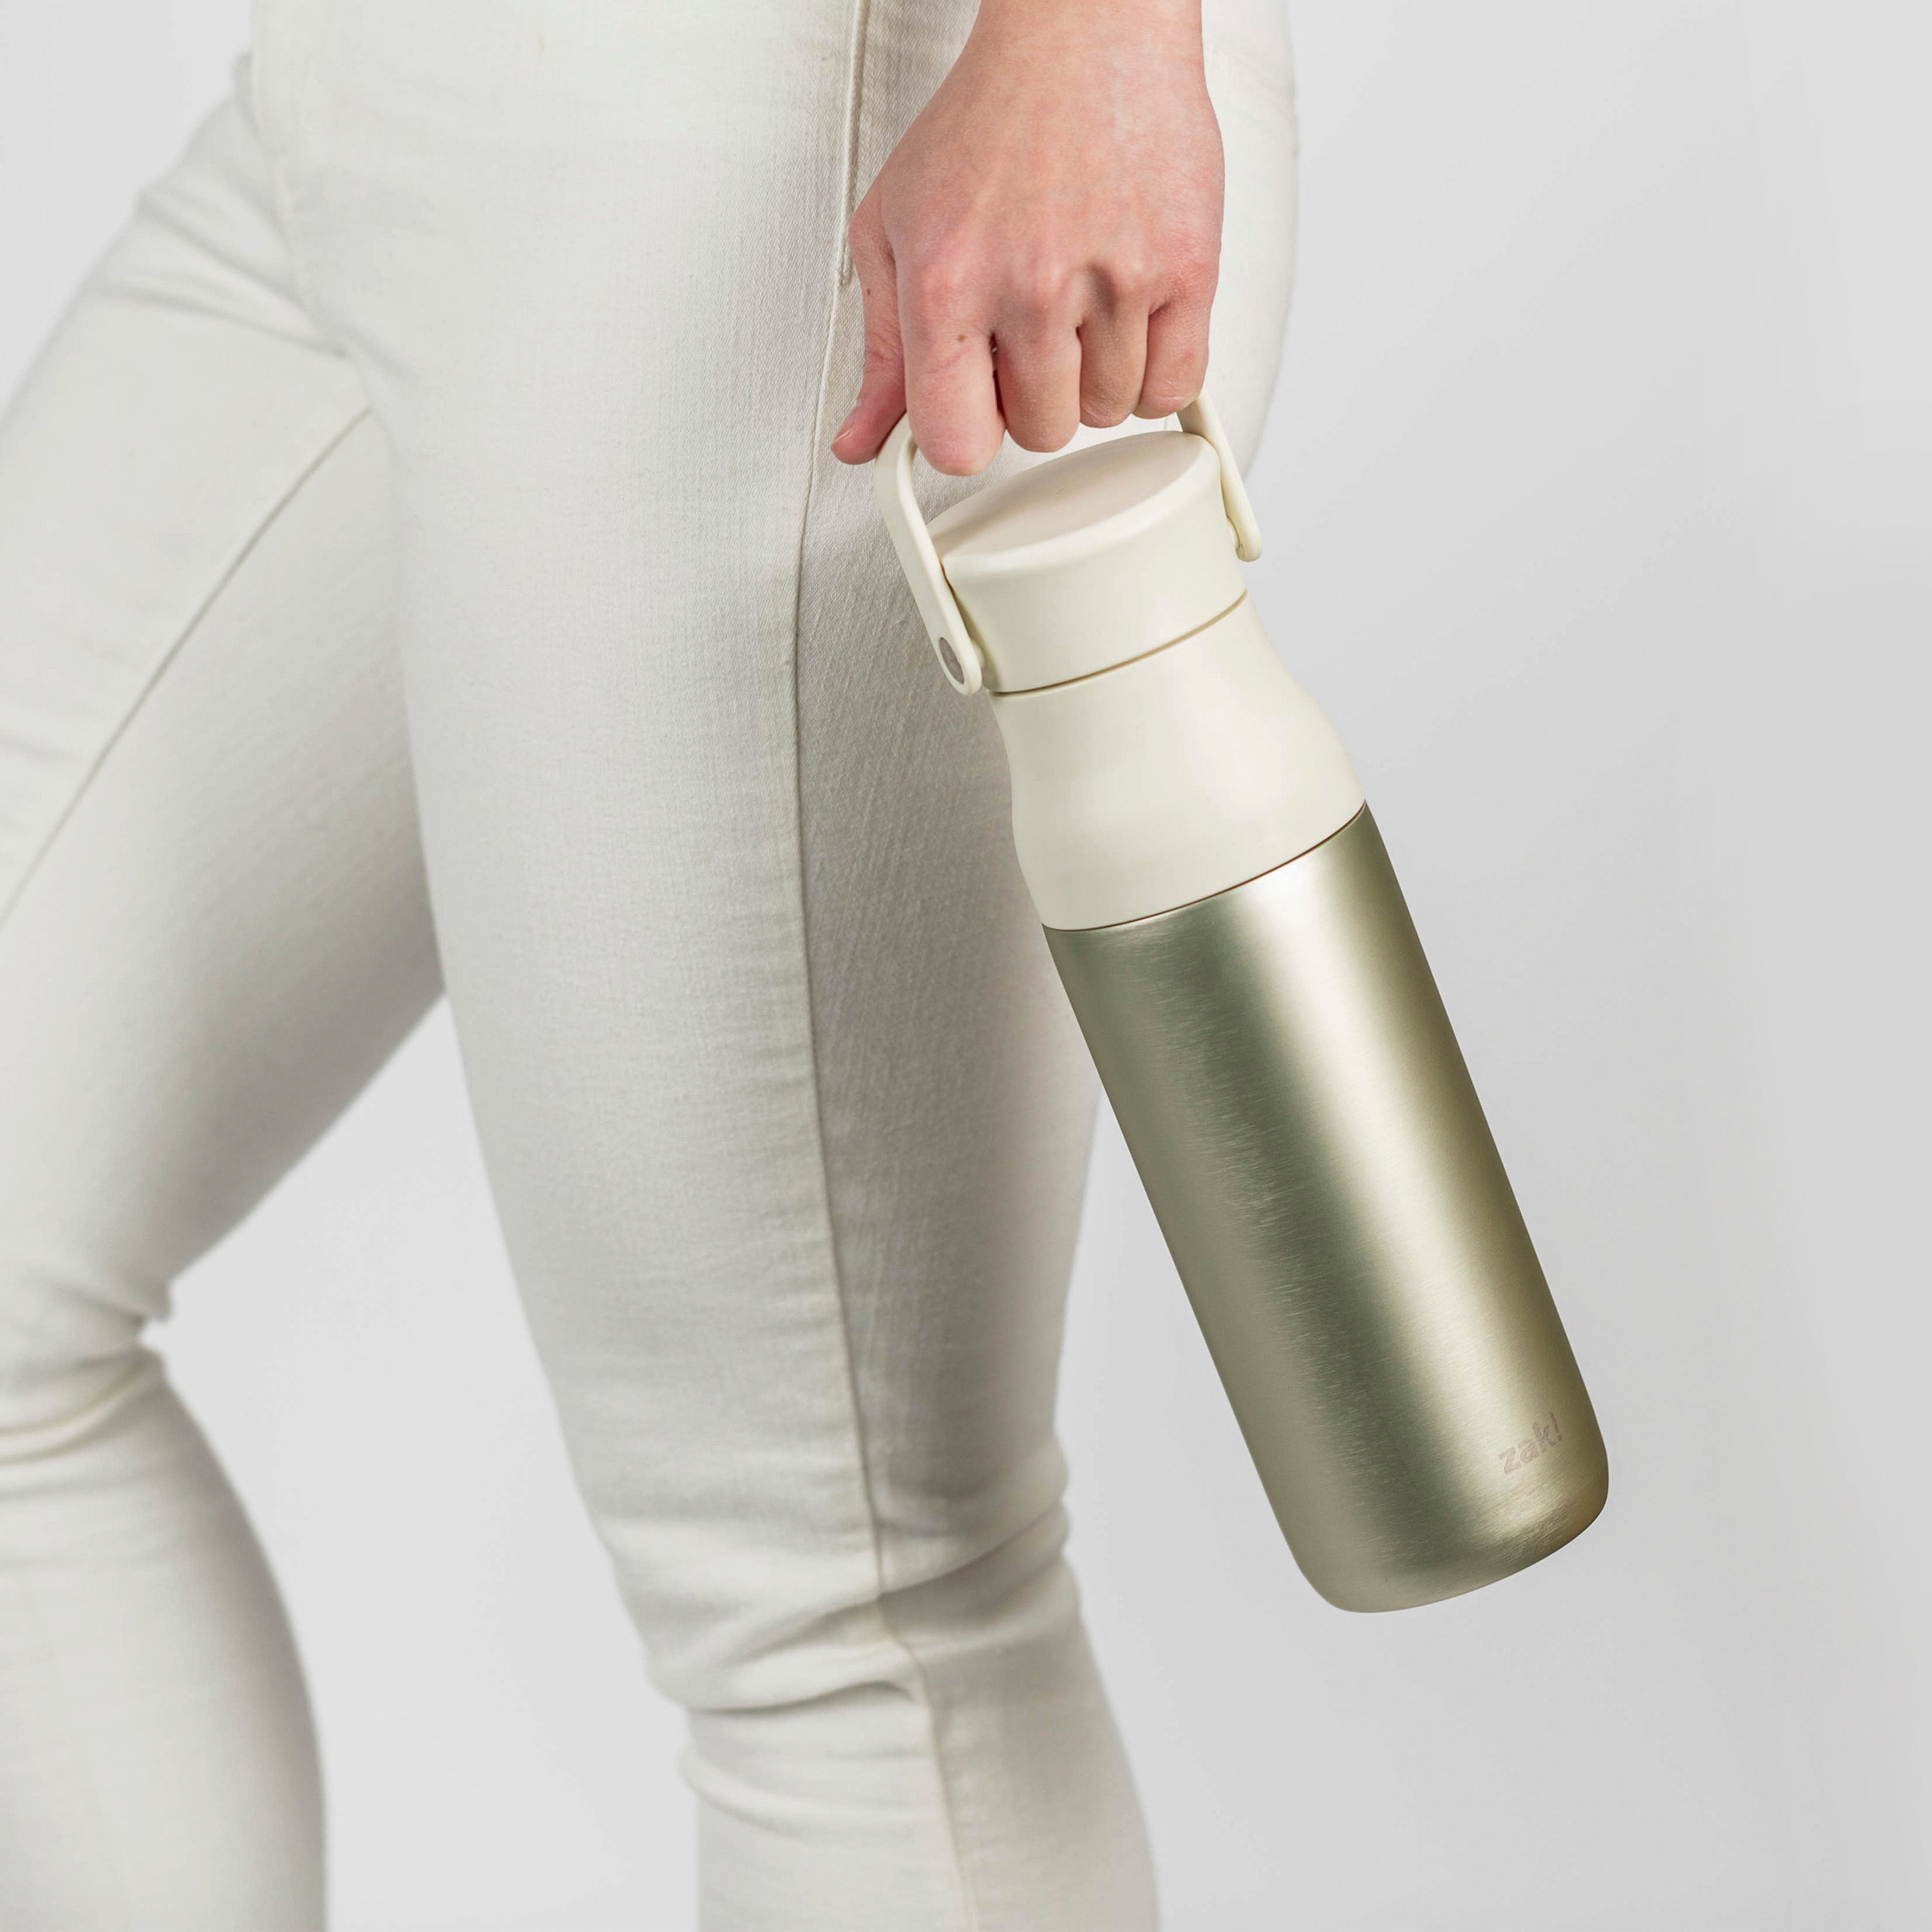 Stainless Steel Insulated Filter Water Bottle